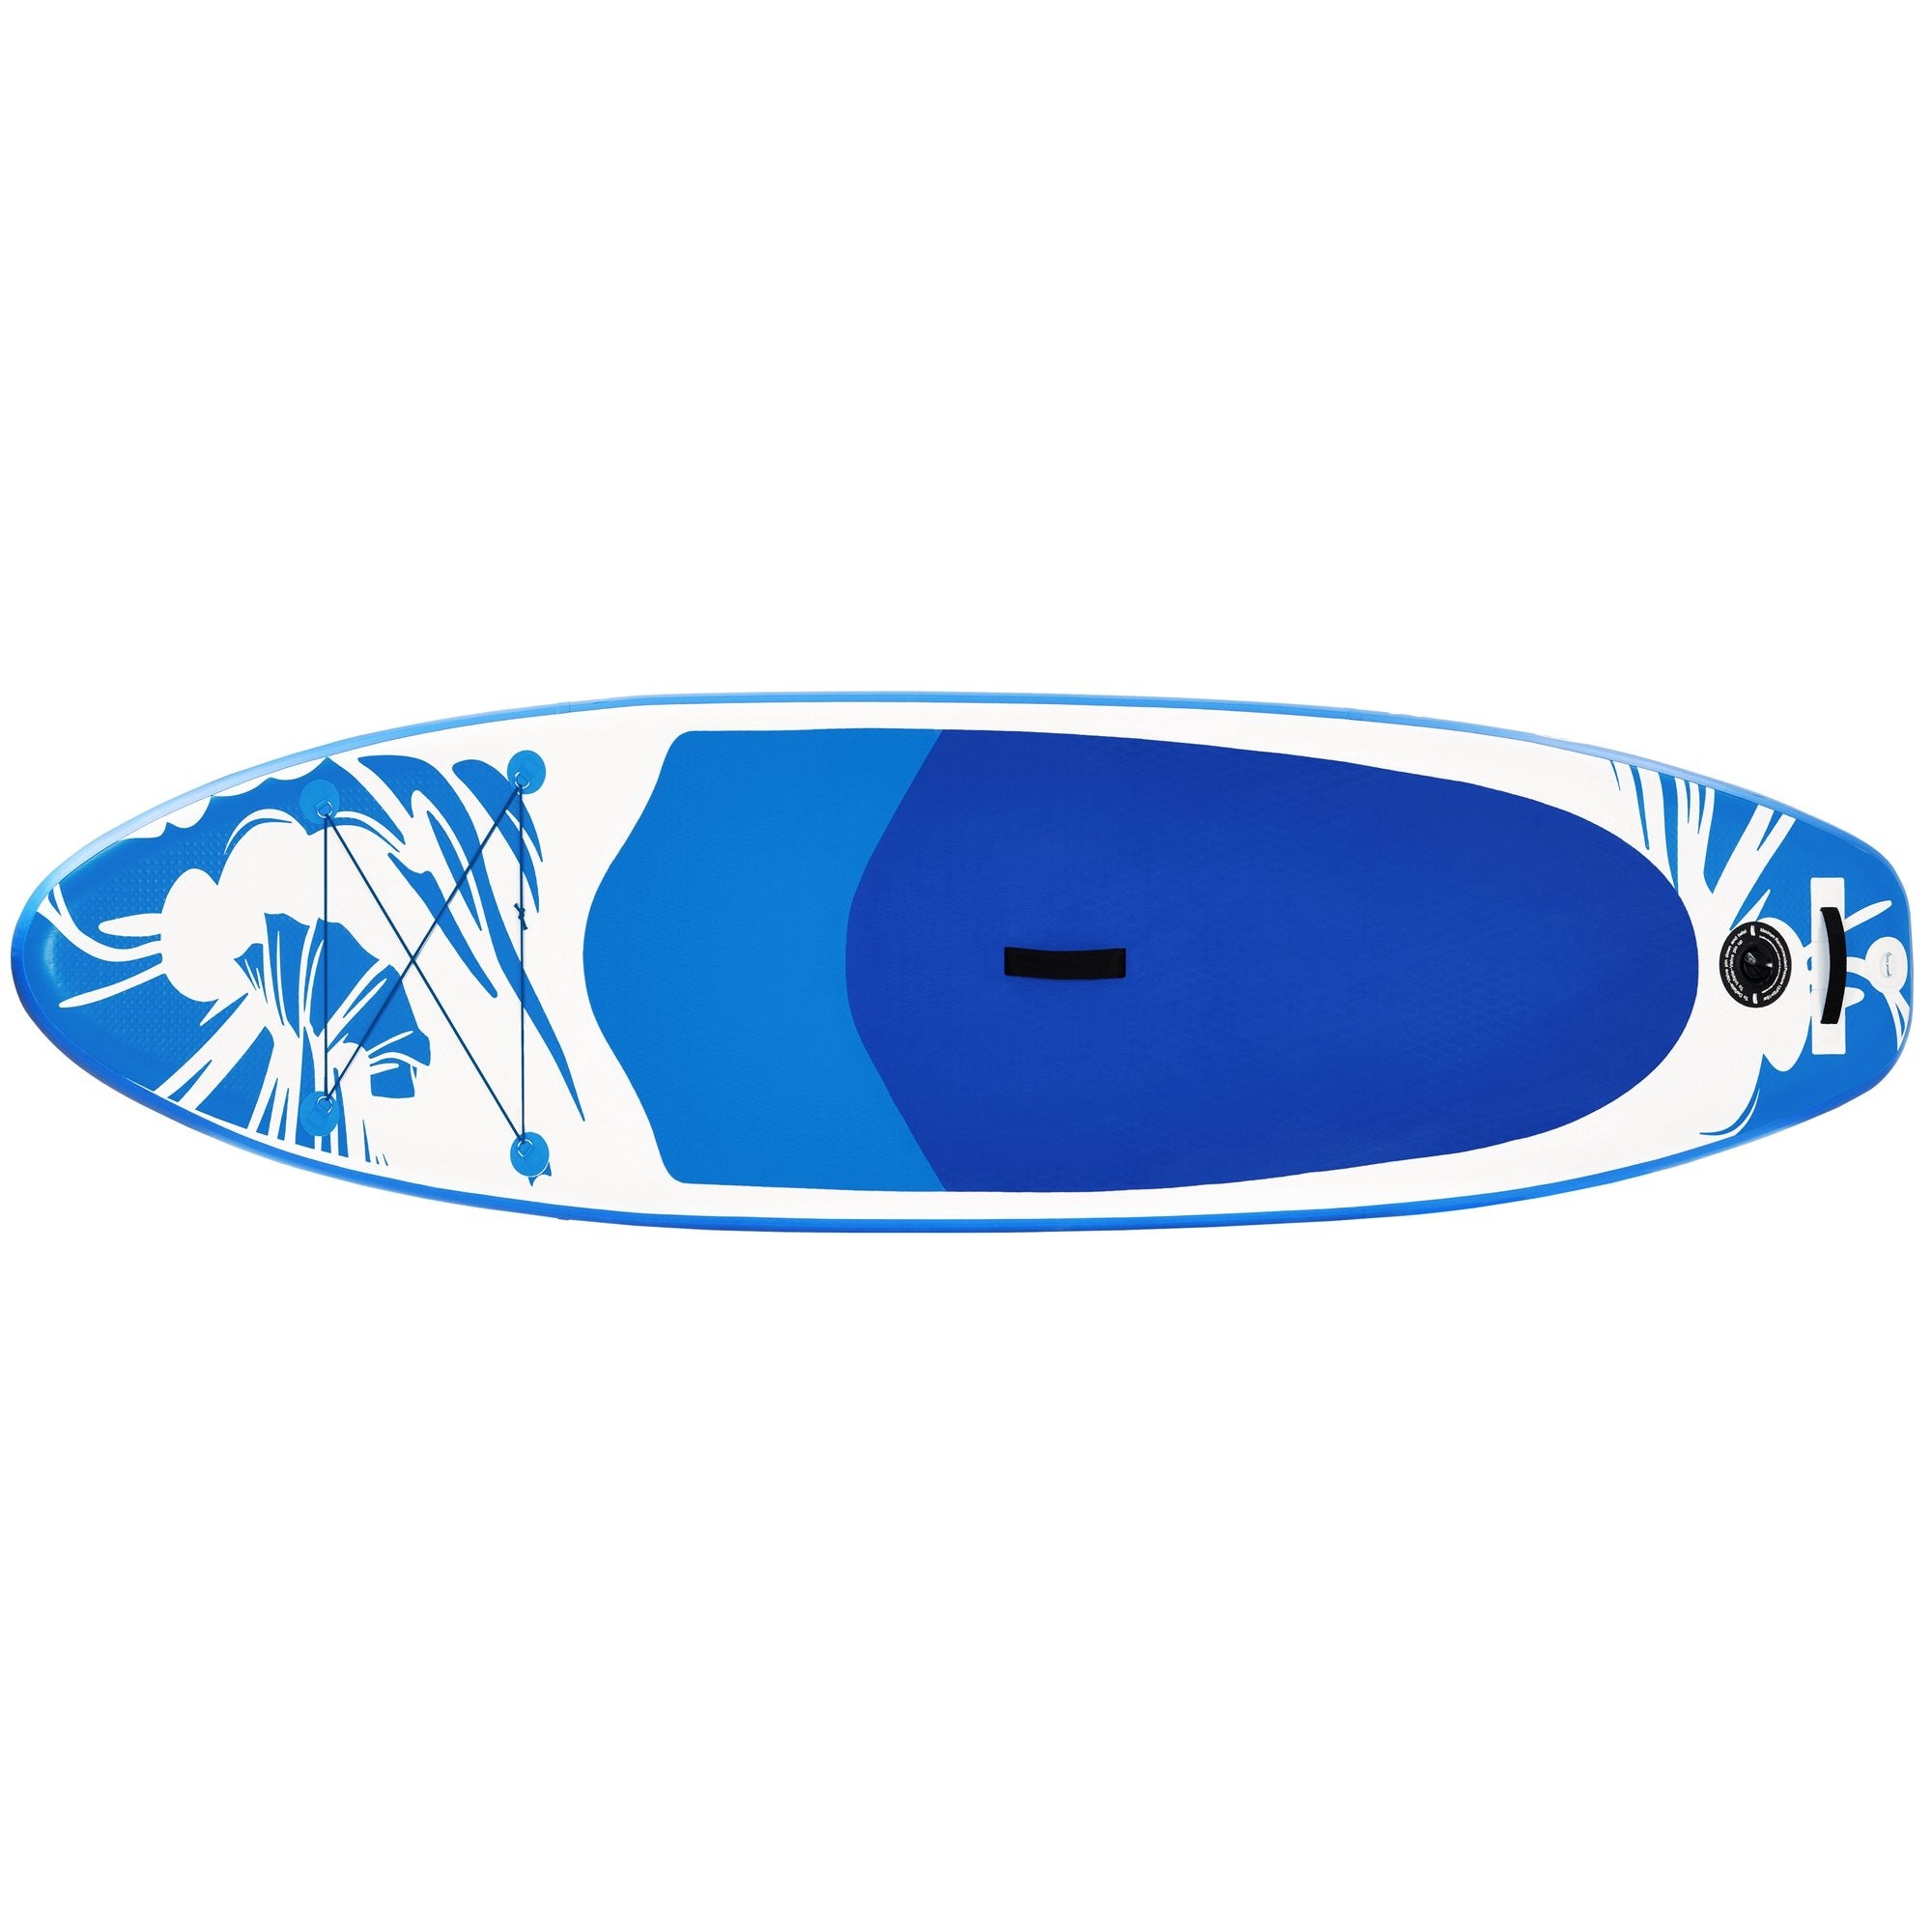 Inflatable Stand Up Paddle Board 10' x 30'' x 6'' Ultra-Light SUP, Non-Slip Deck